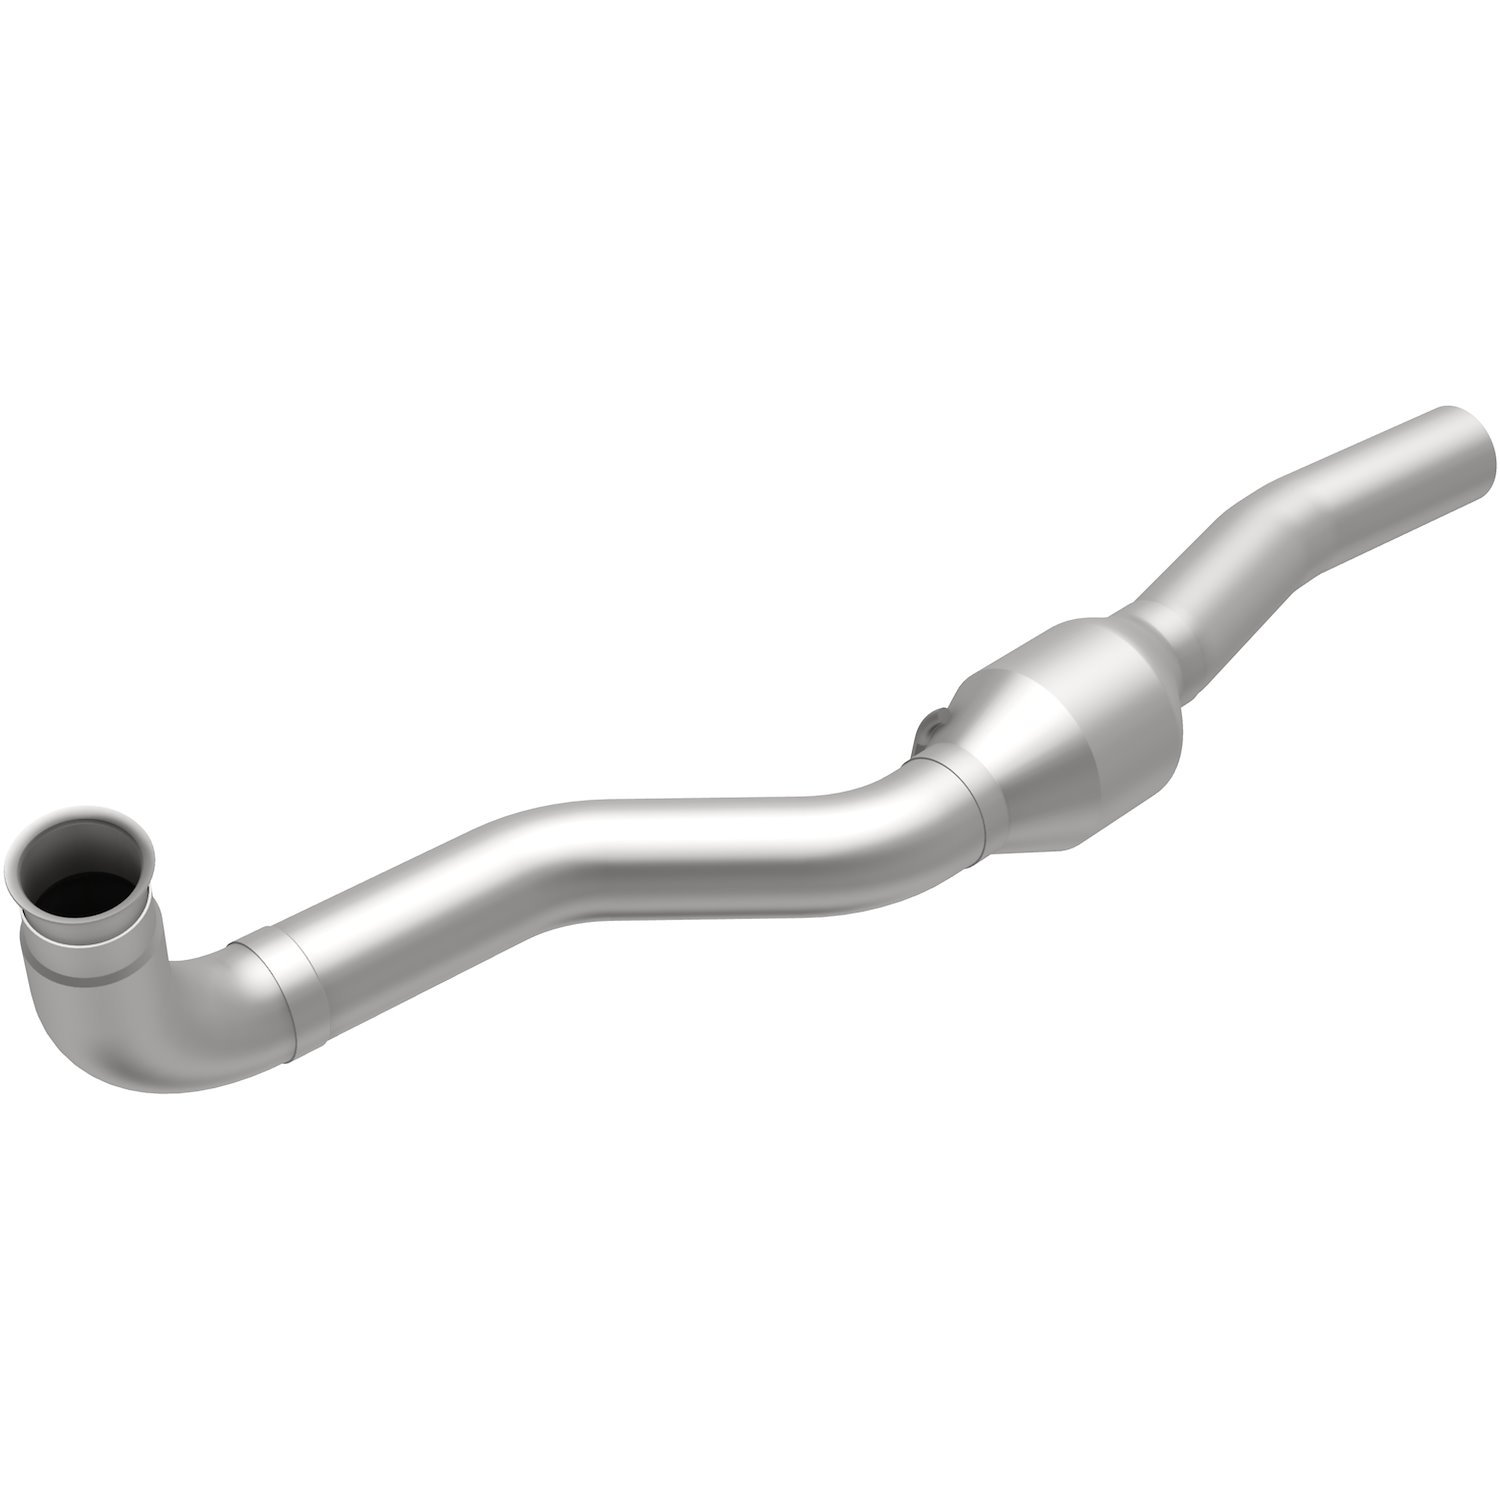 HM Grade Federal / EPA Compliant Direct-Fit Catalytic Converter 60502